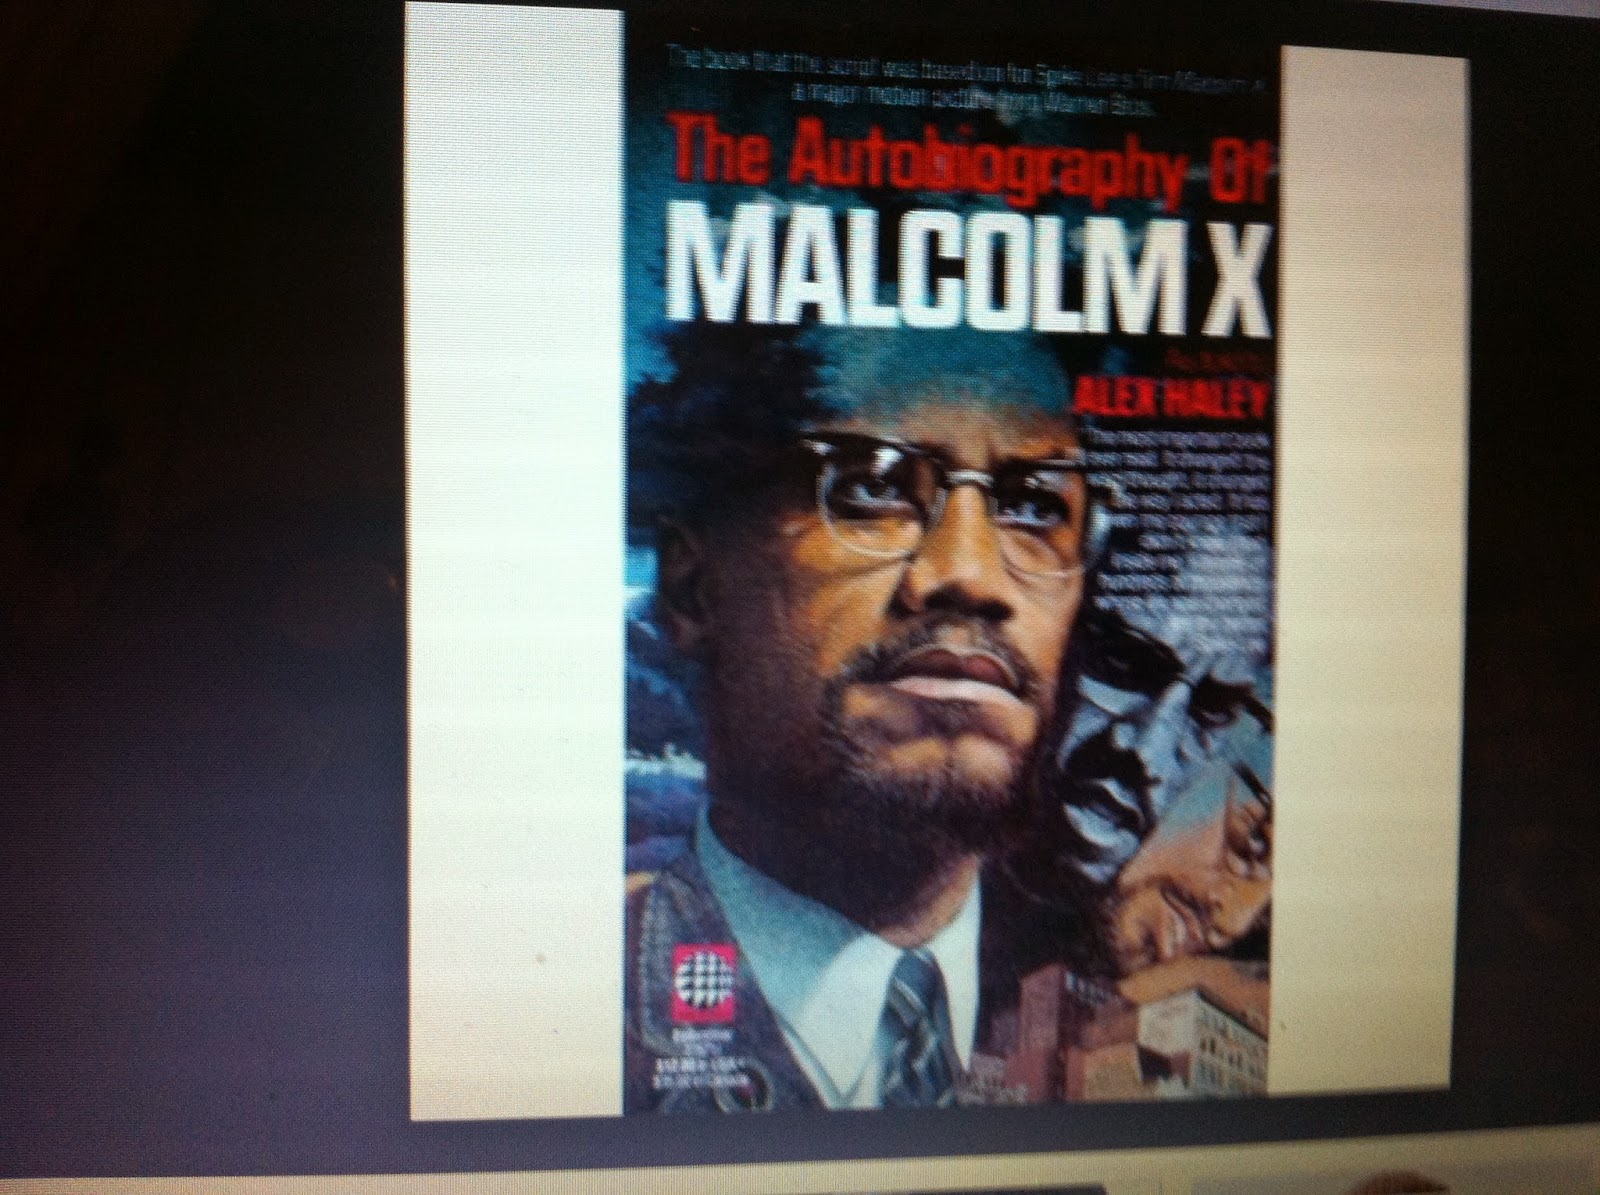 Malcolm X An Extraordinary Figure For African